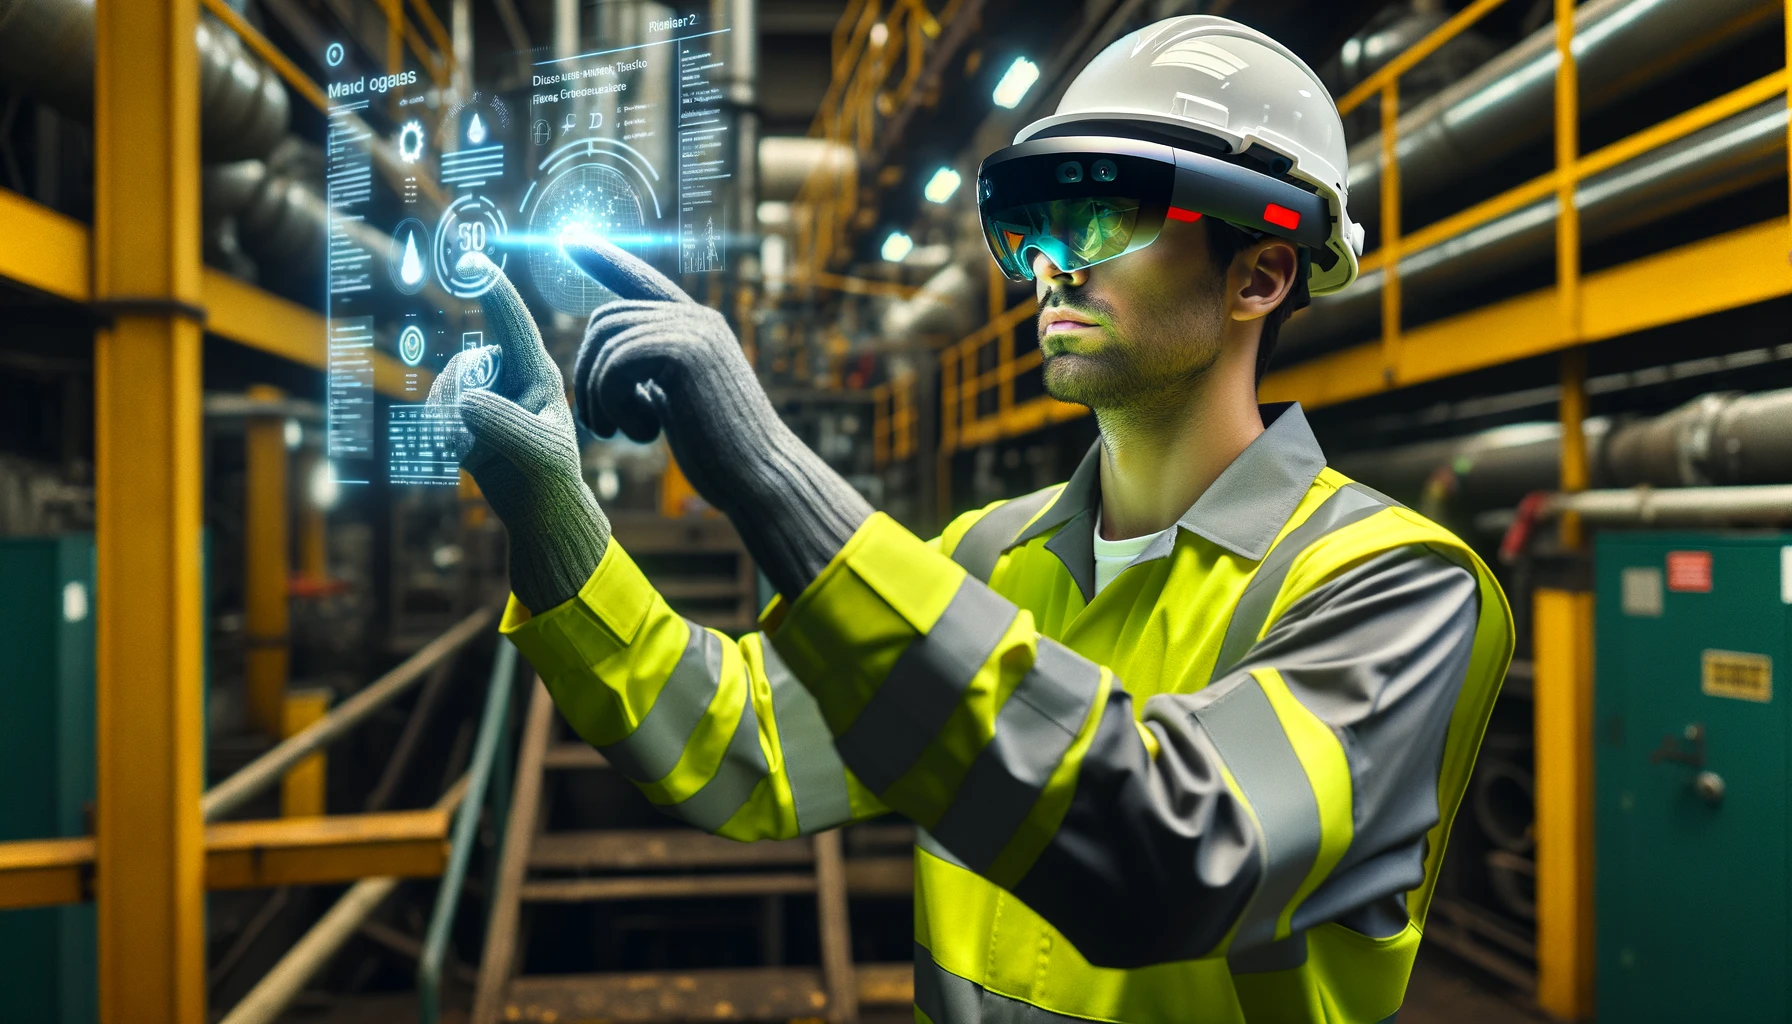 Operator using Hololens 2 Mixed Reality glasses in an industrial building.